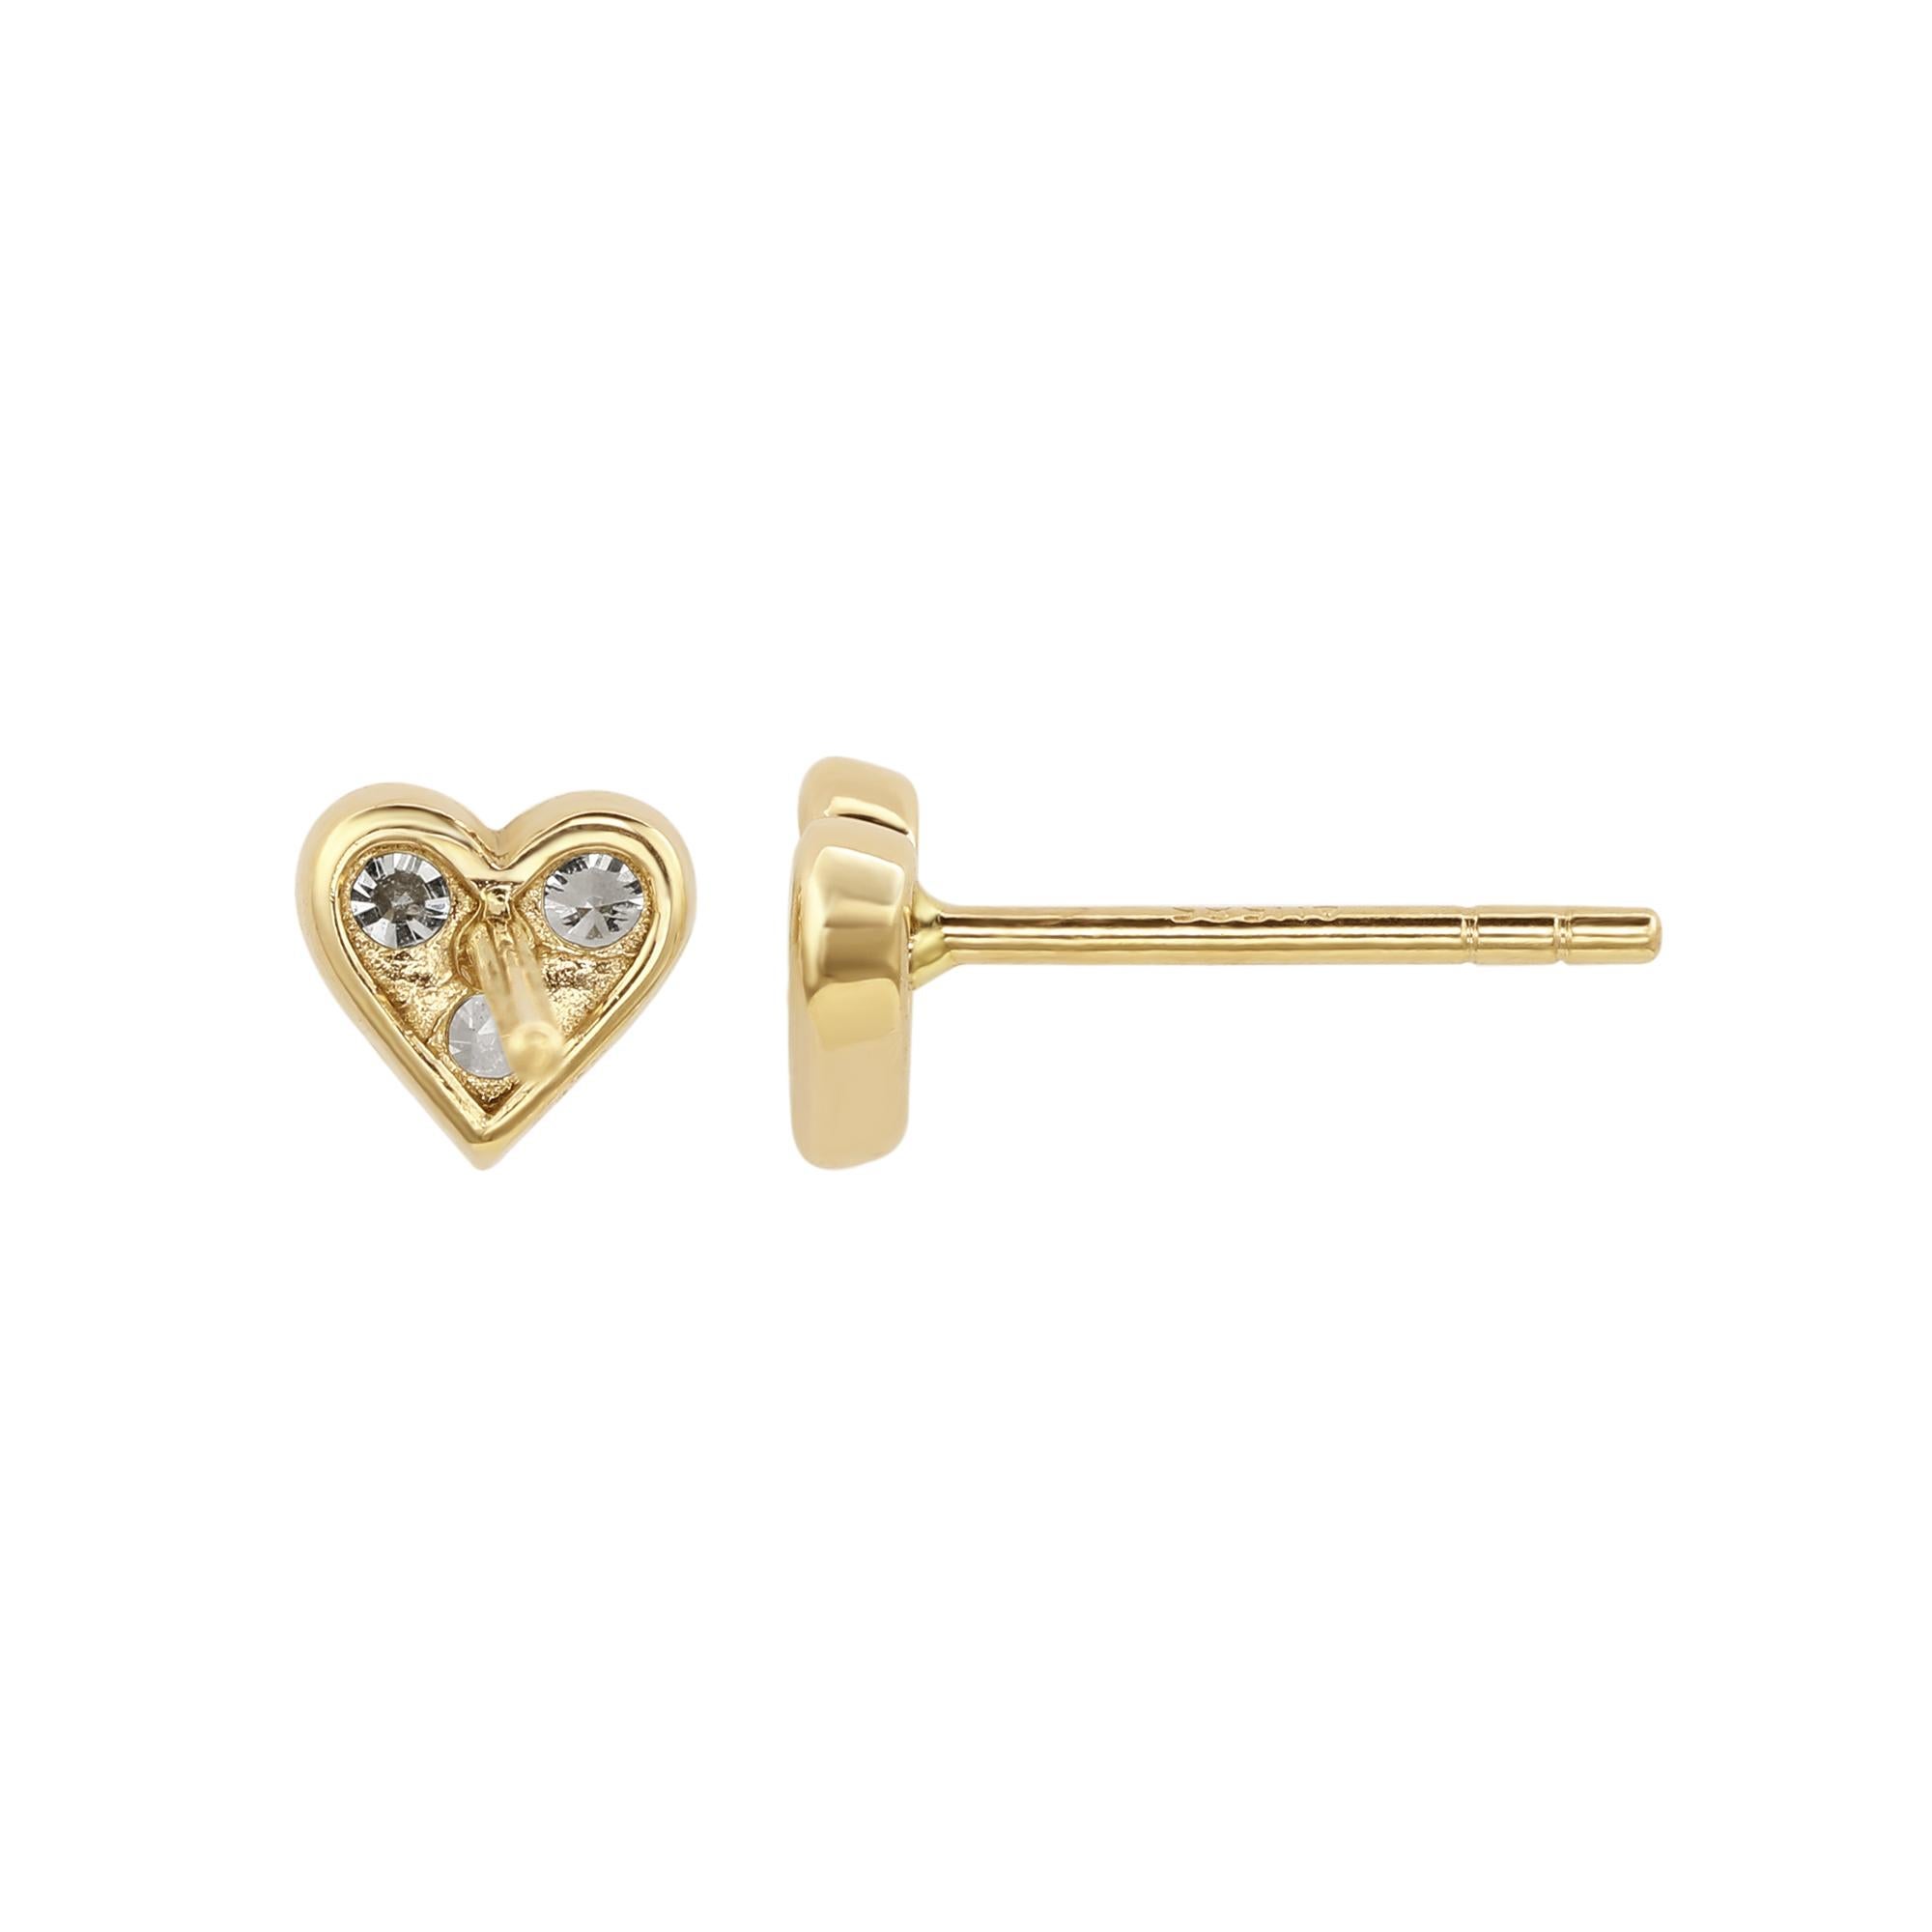 Add an elegant accent to your outfit with these sparkling Suzy Levian heart shape stud earrings featuring six round cut gorgeous white diamonds in a prong setting. The sparkling diamonds are hand set in 14-karat yellow gold, and weigh 0.30 cttw and